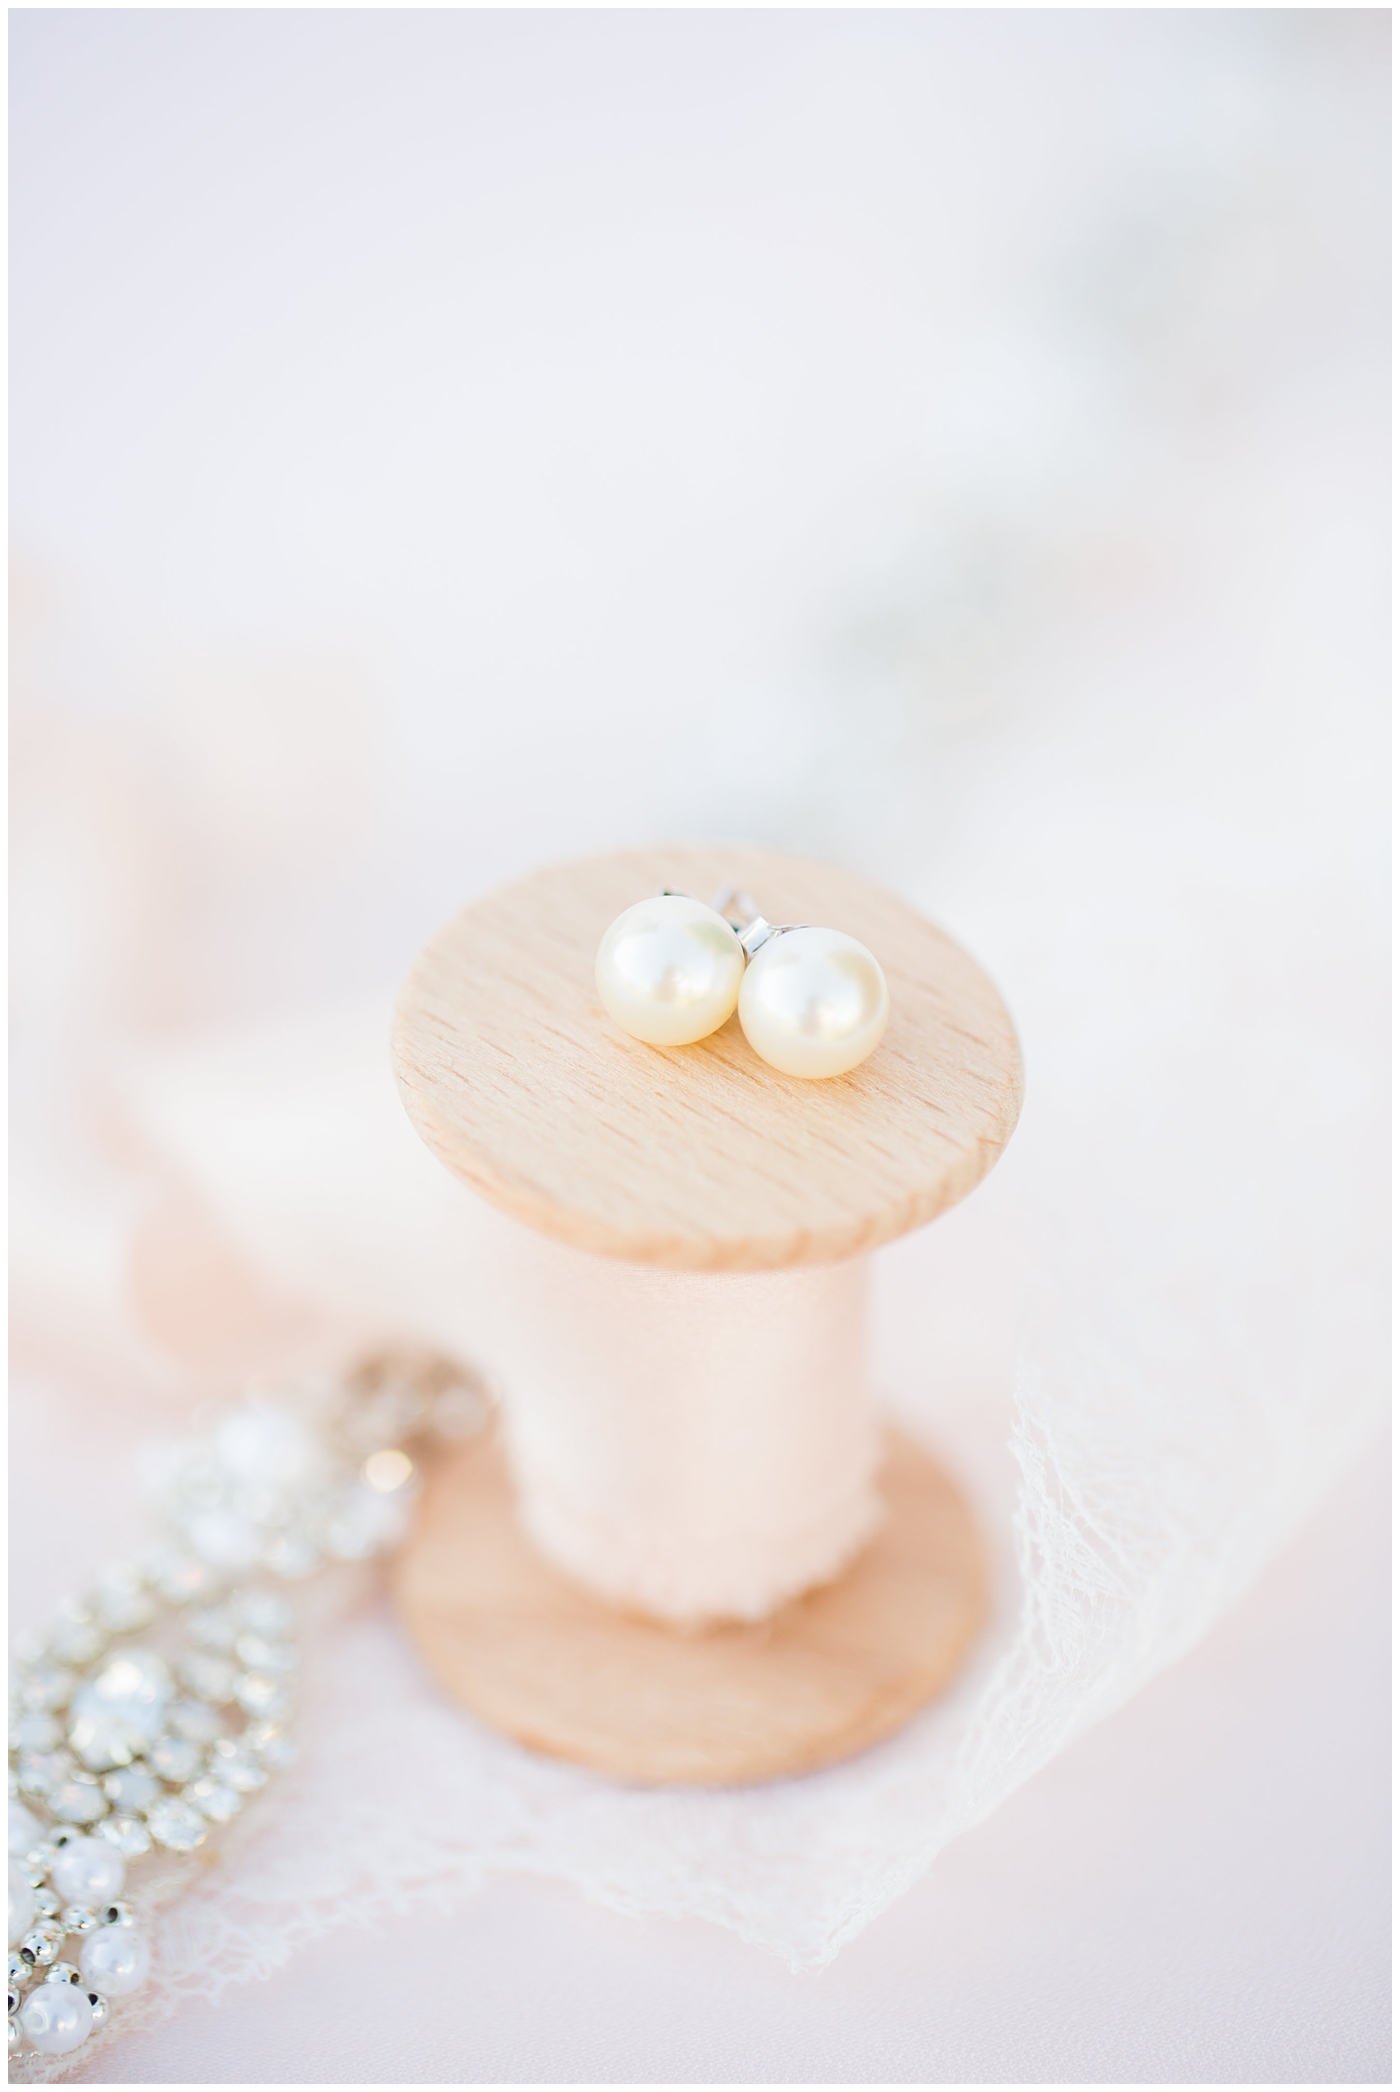 pearl earrings for wedding day